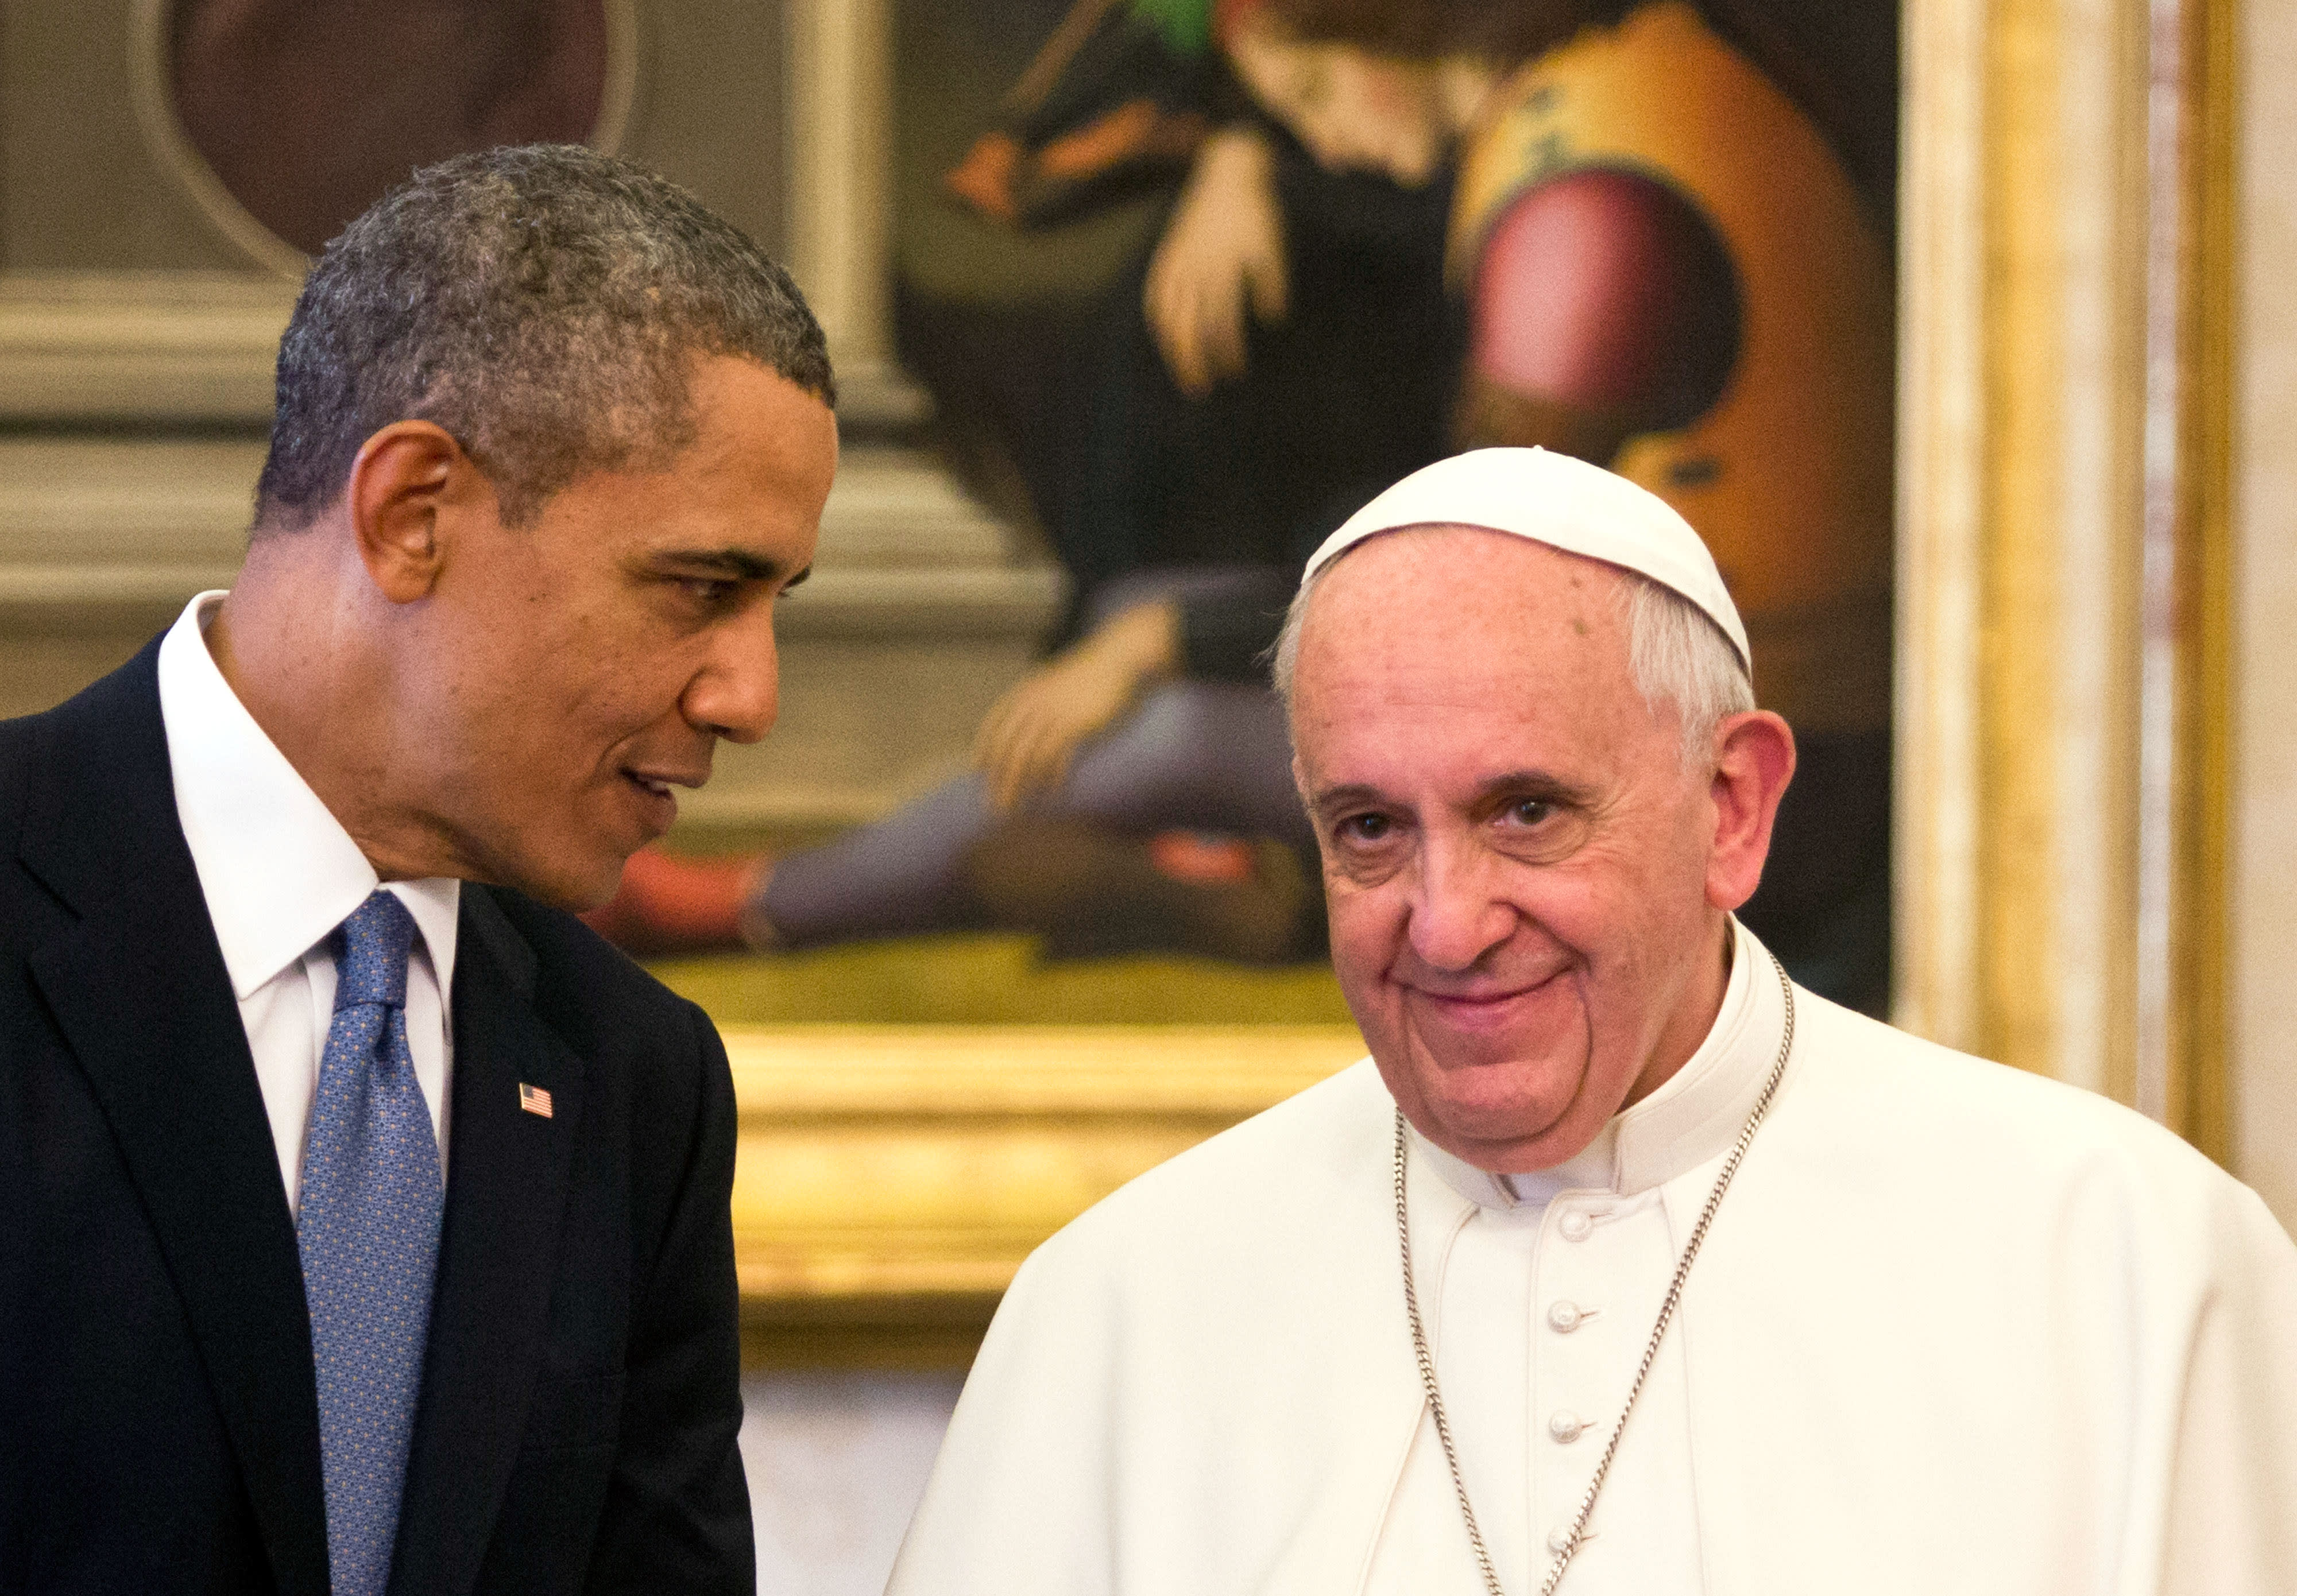 Obama Pope Francis, fight against inequality